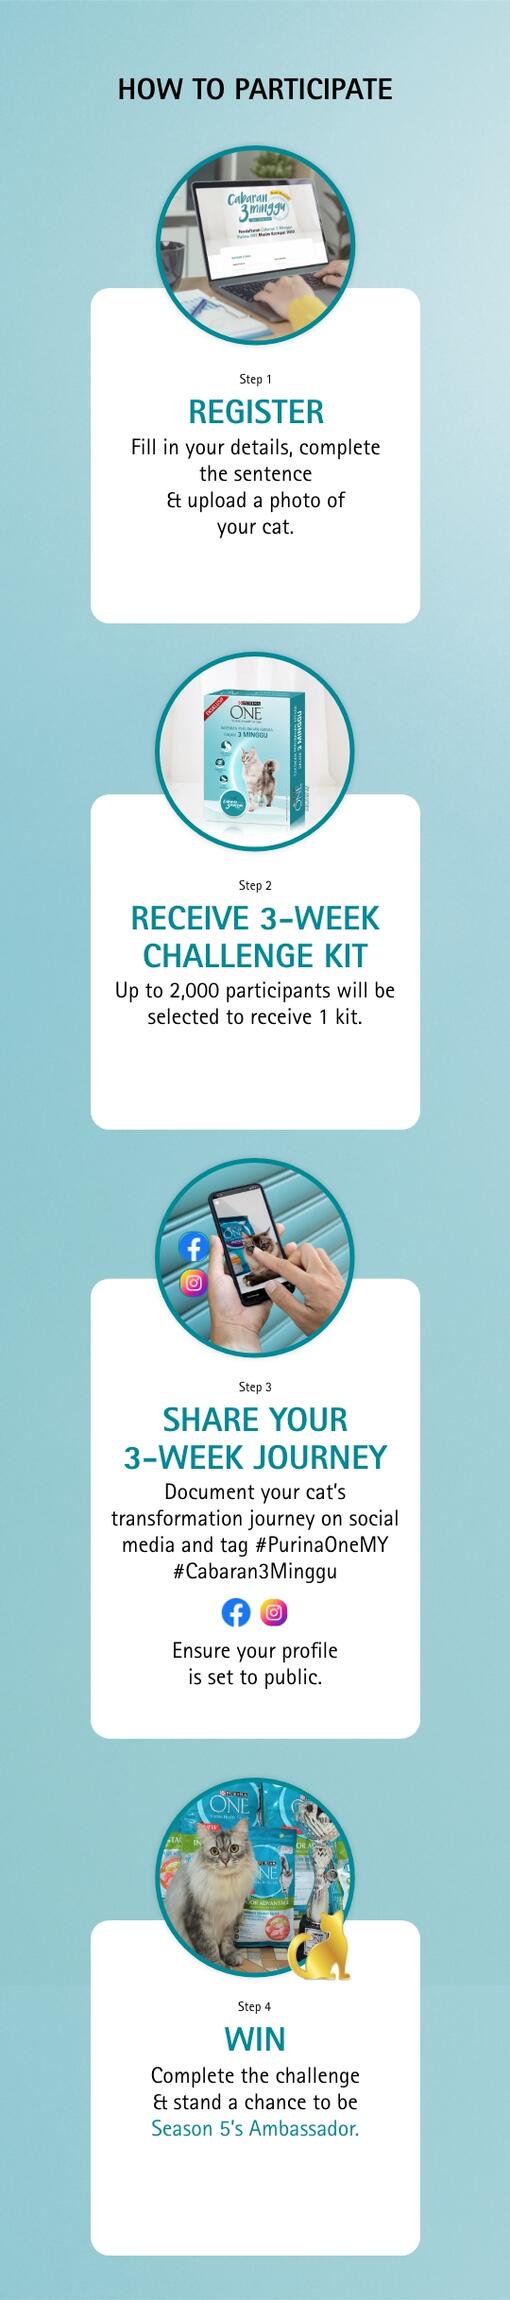 How-to-participate-mobile